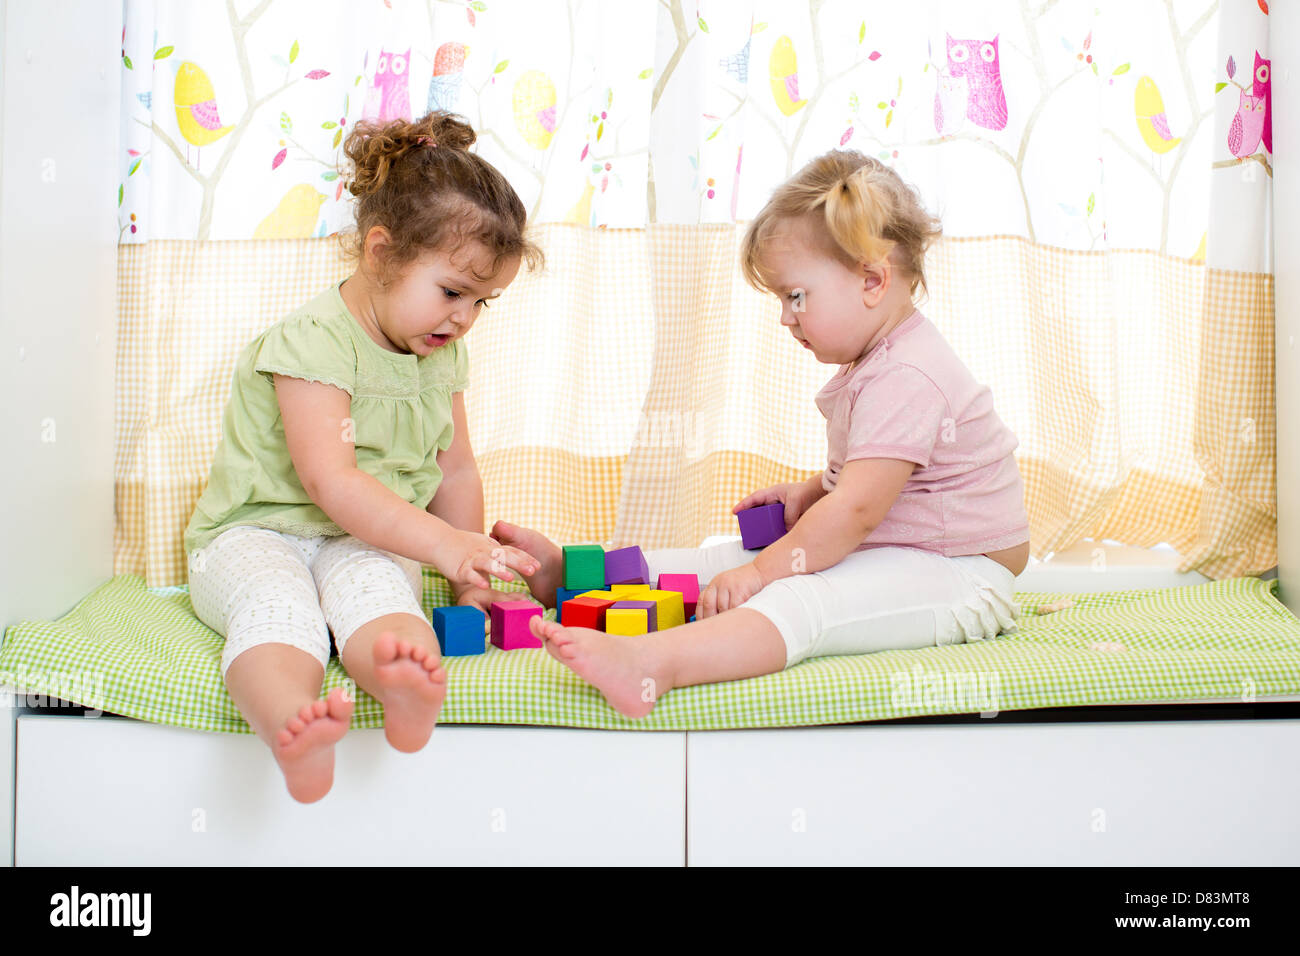 children sisters playing together indoors Stock Photo